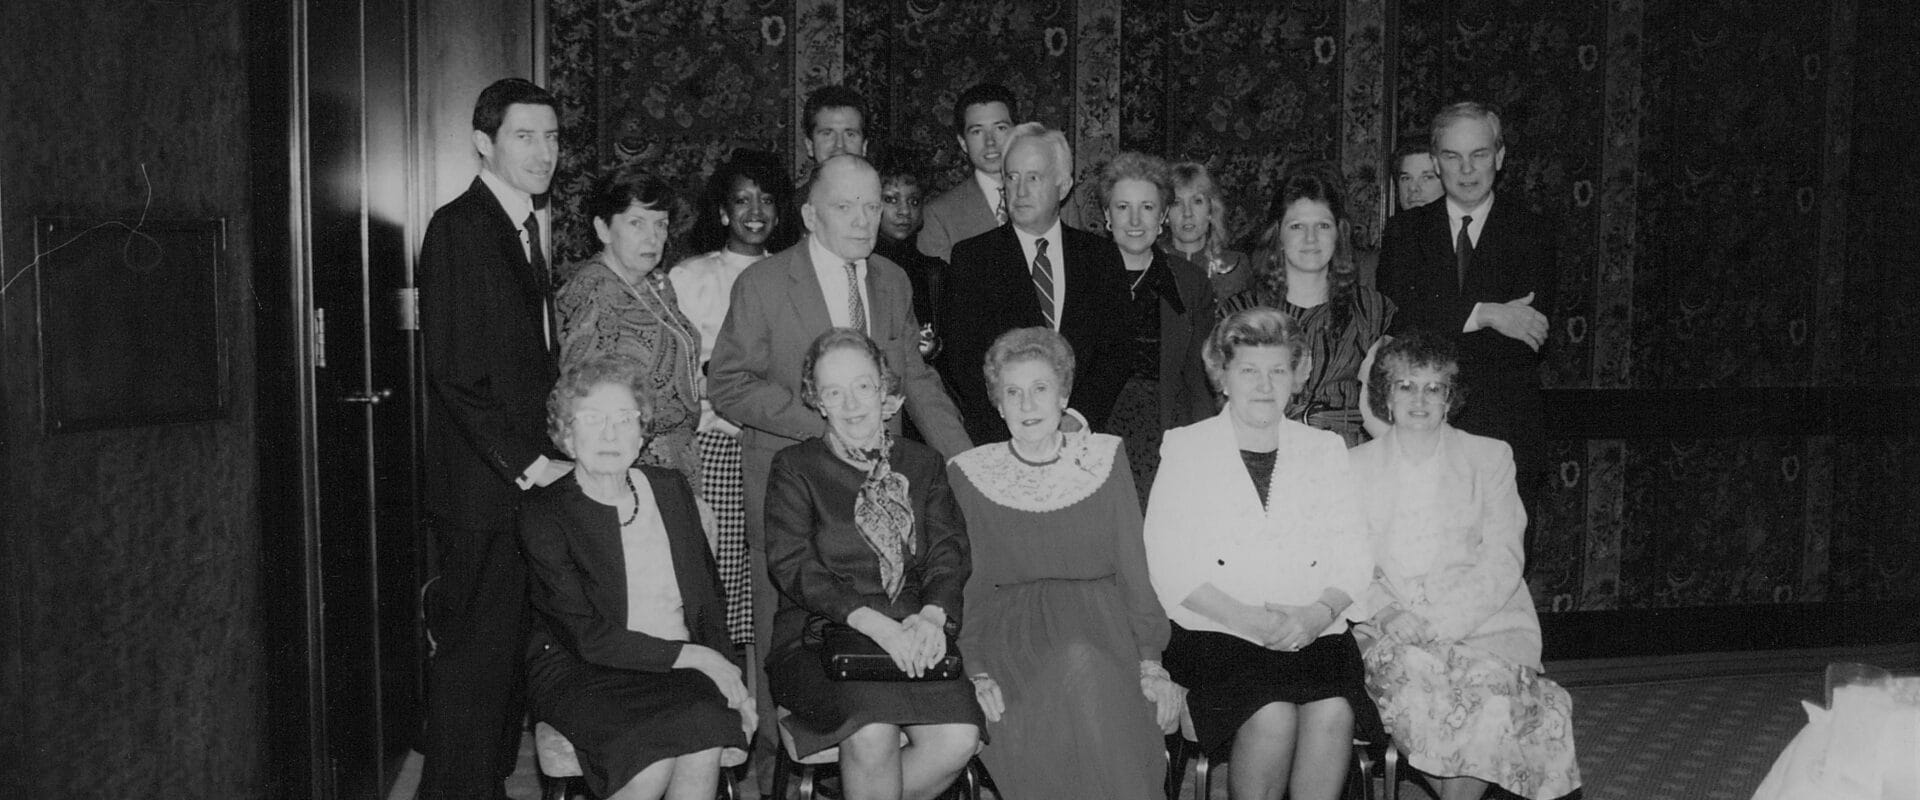 A photo from the 1980s. It shows 17 HWP staff members posed for a photo. 5 ladies are seated in the front, and the rest are standing behind them.